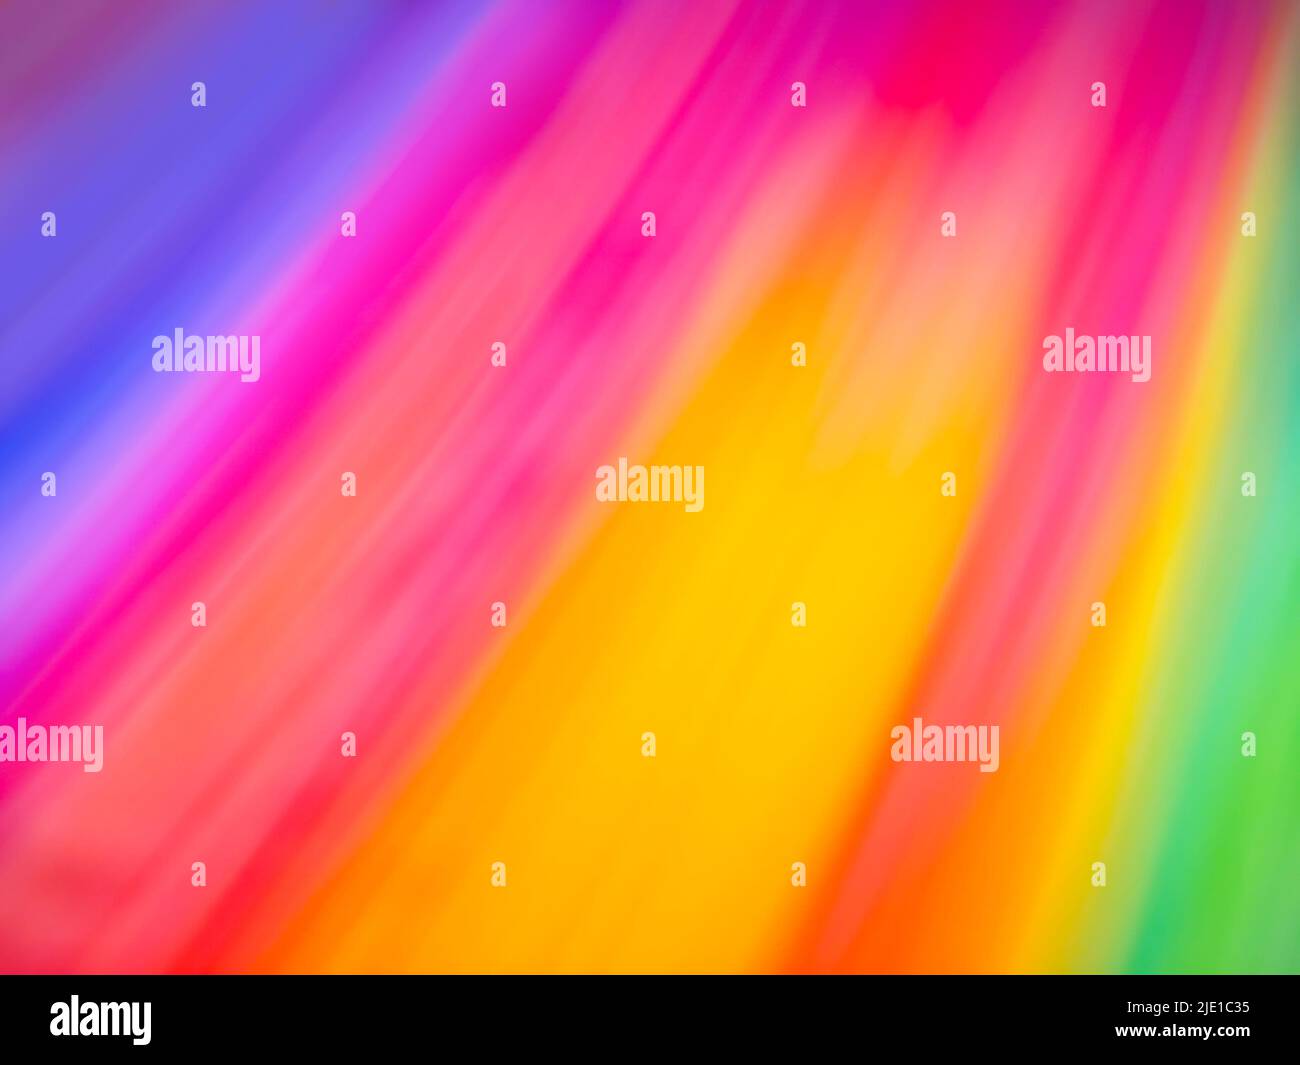 Abstract blur creative original background as a concept of happiness. Happiness abstract blurred shine lights background. Stock Photo